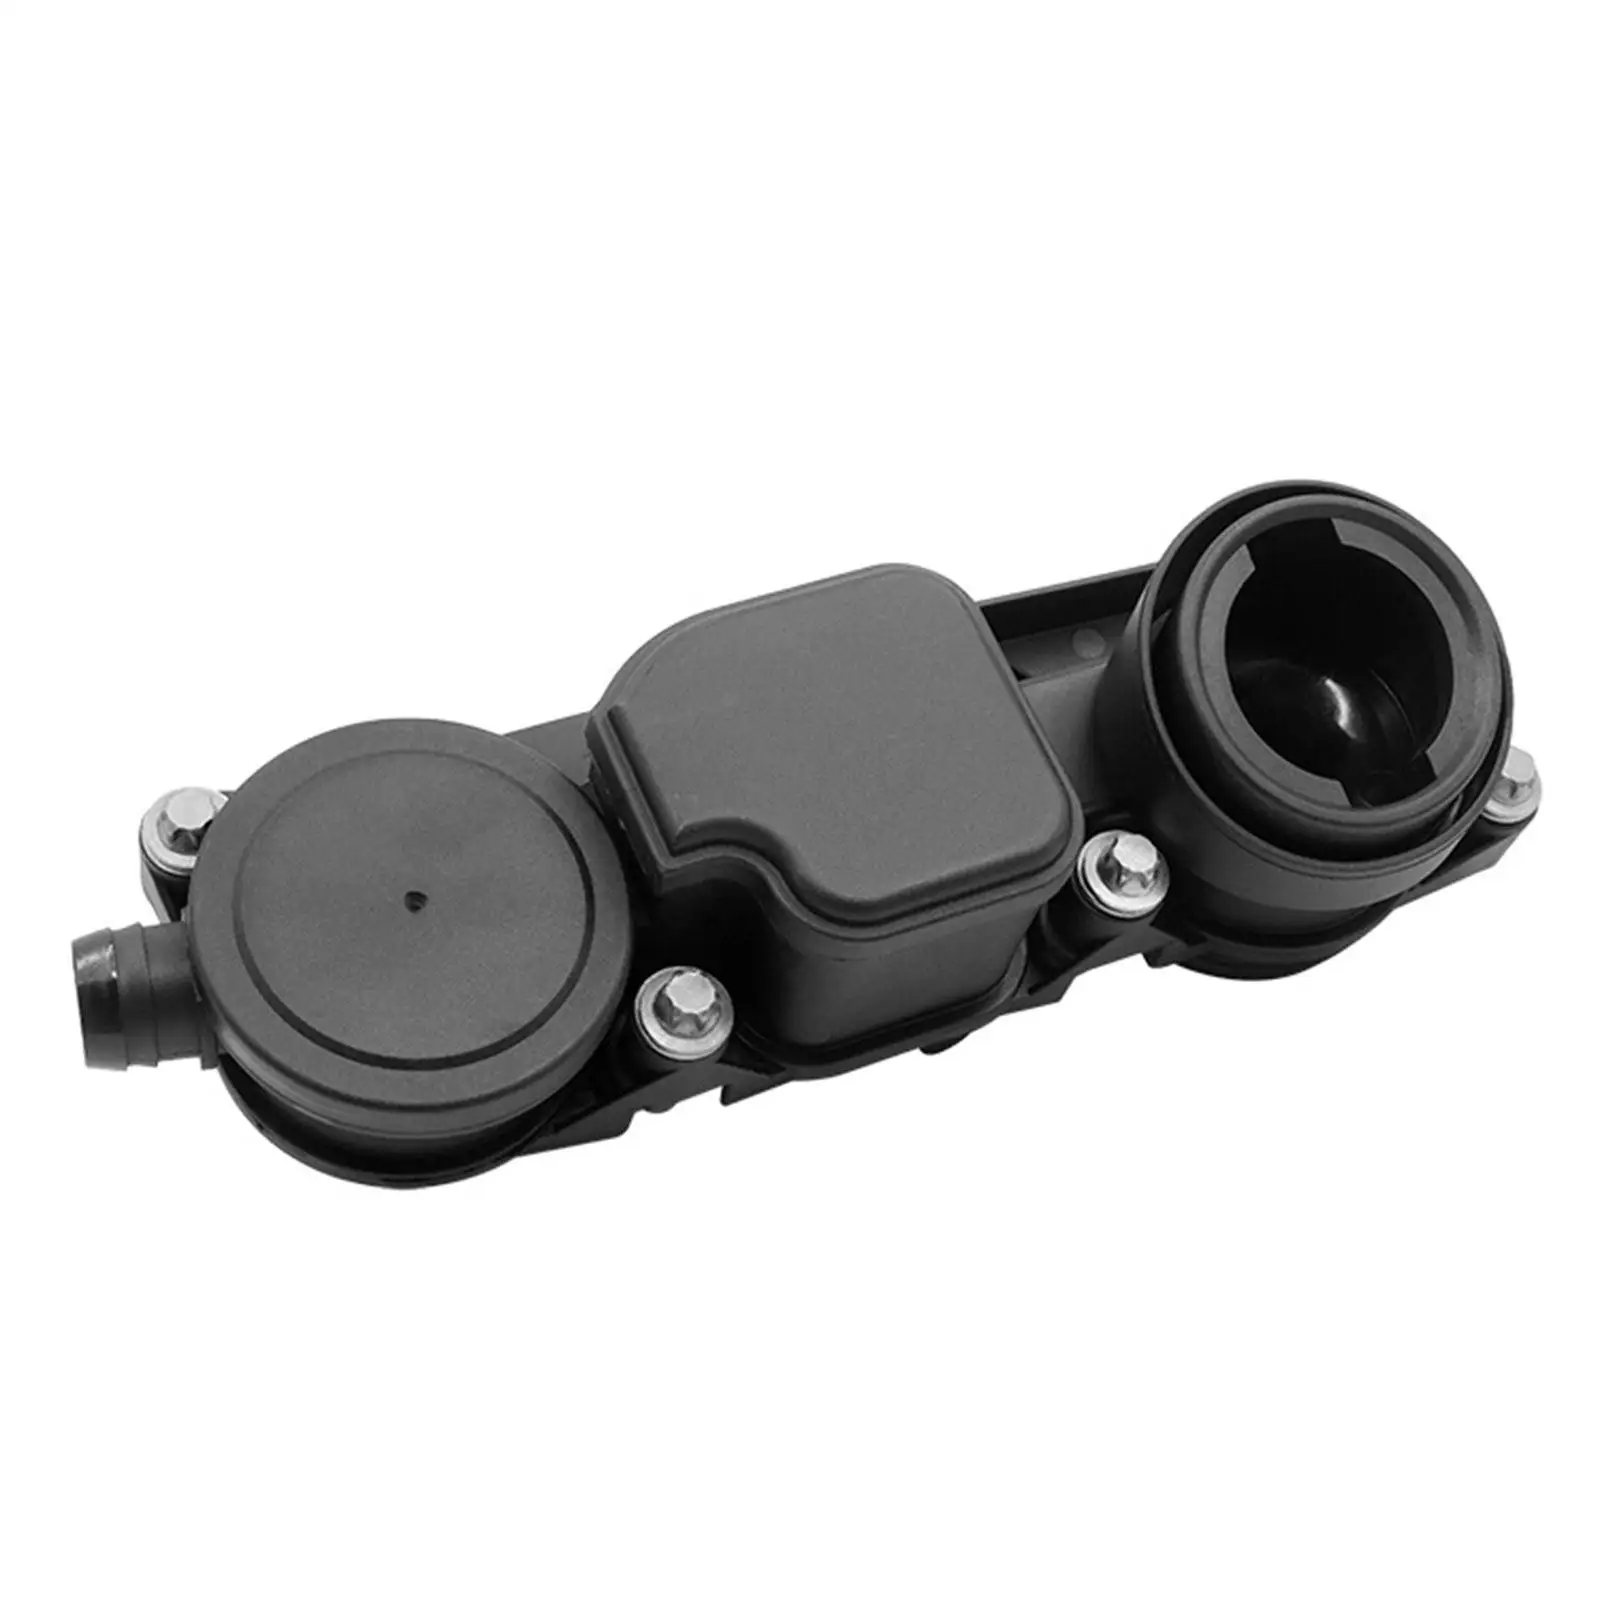 Oil Separator Crankcase Breather Replacement Accessory Durable Easy to Install 6460101462 for Mercedes-Benz C209 S211 W211